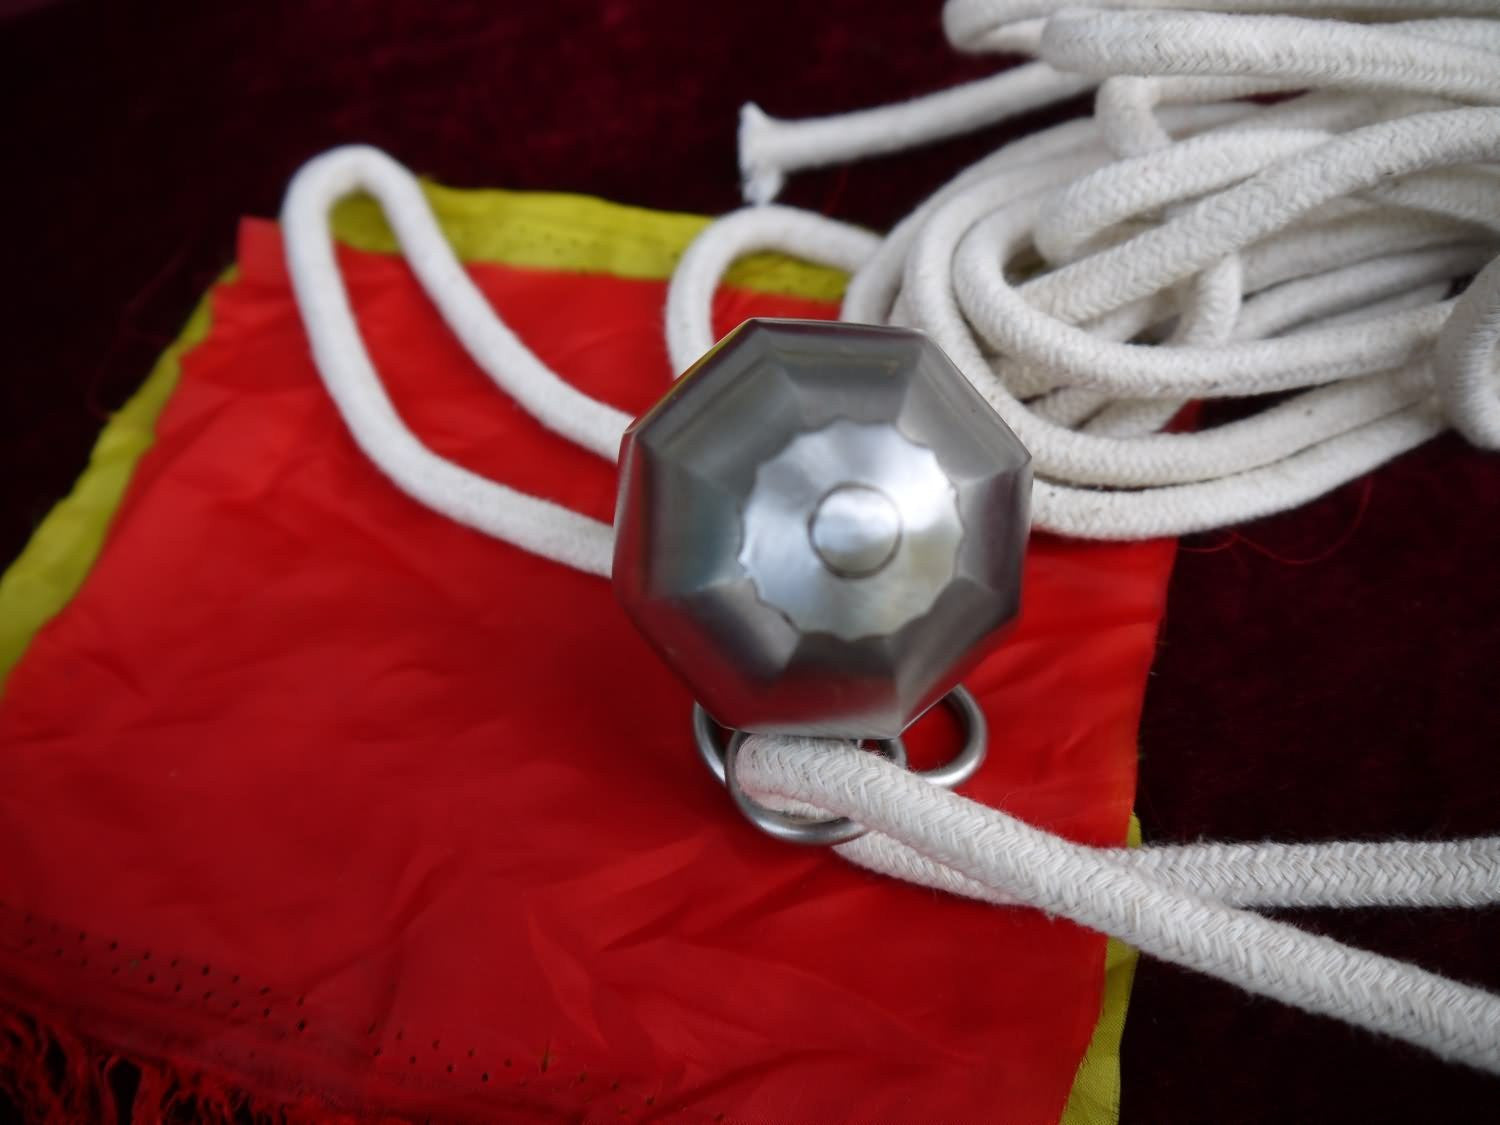 Meteor Hammer/Stainless steel/Chinese martial arts/China kungfu - Chinese sword shop